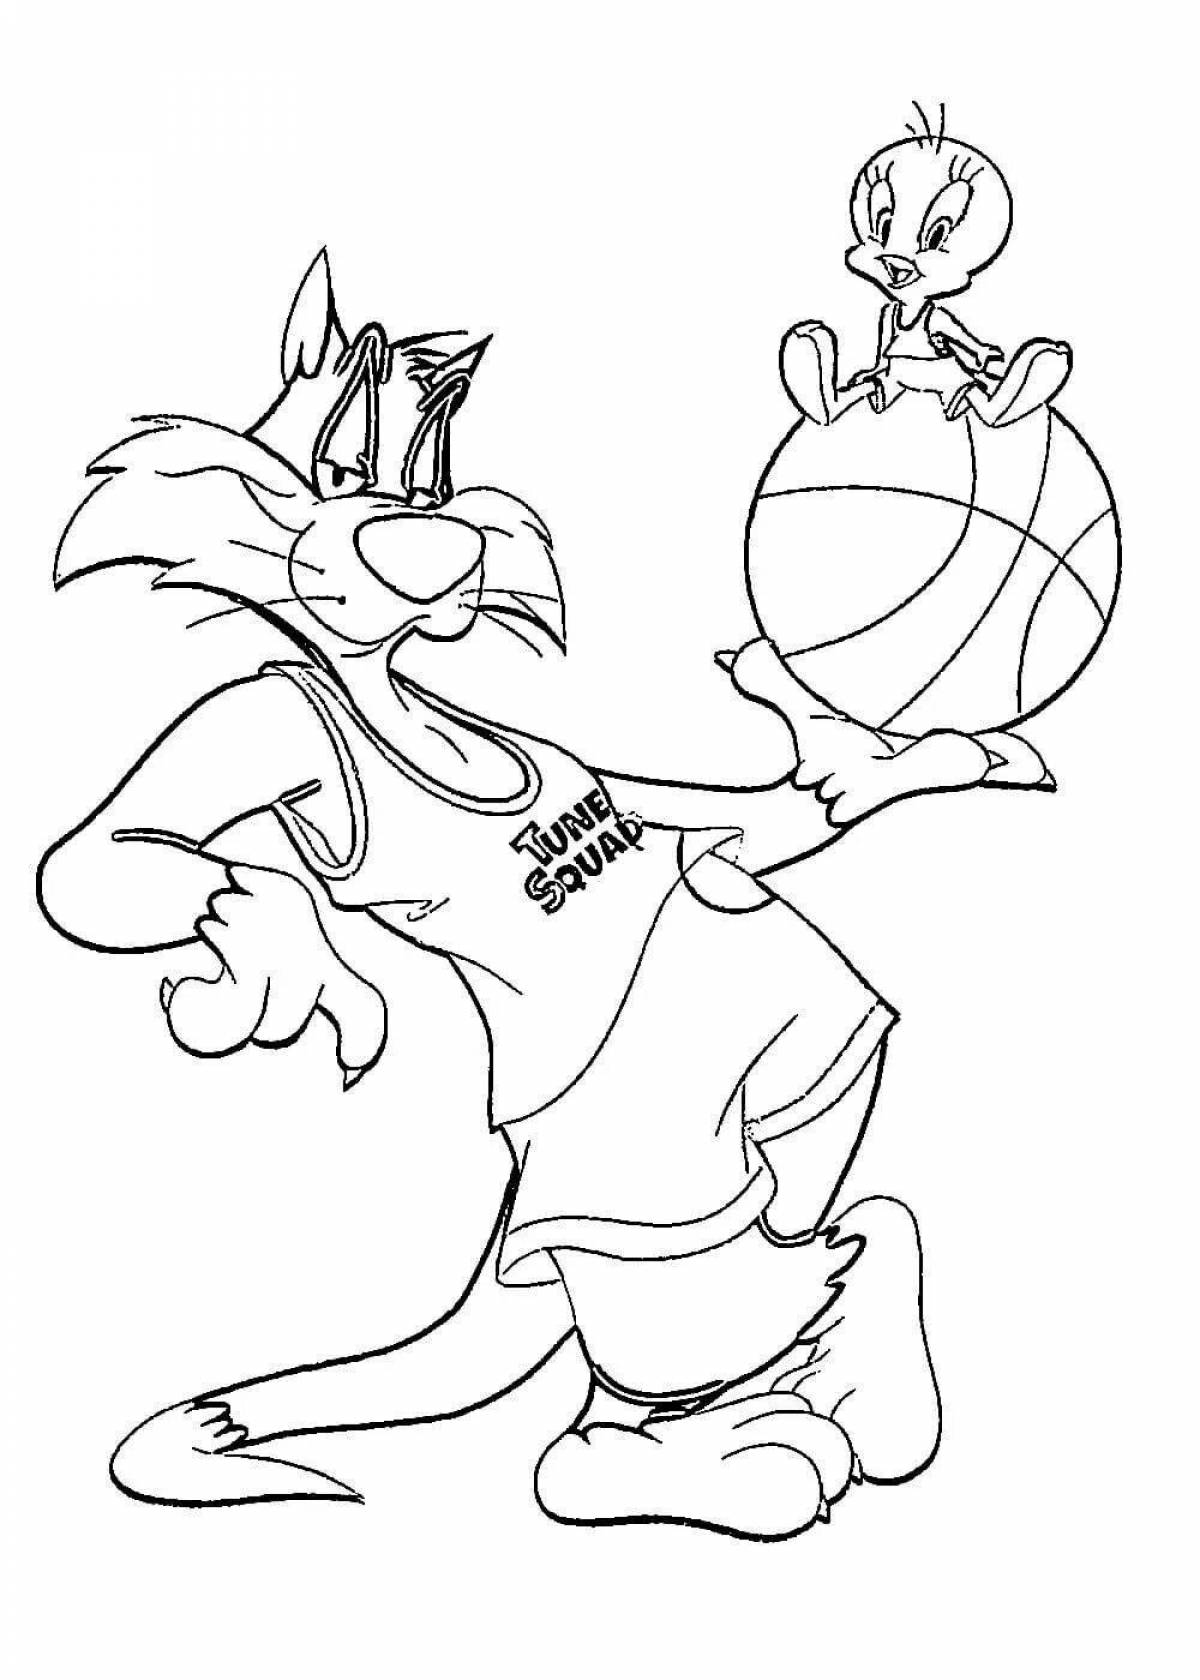 Colouring awesome space jam